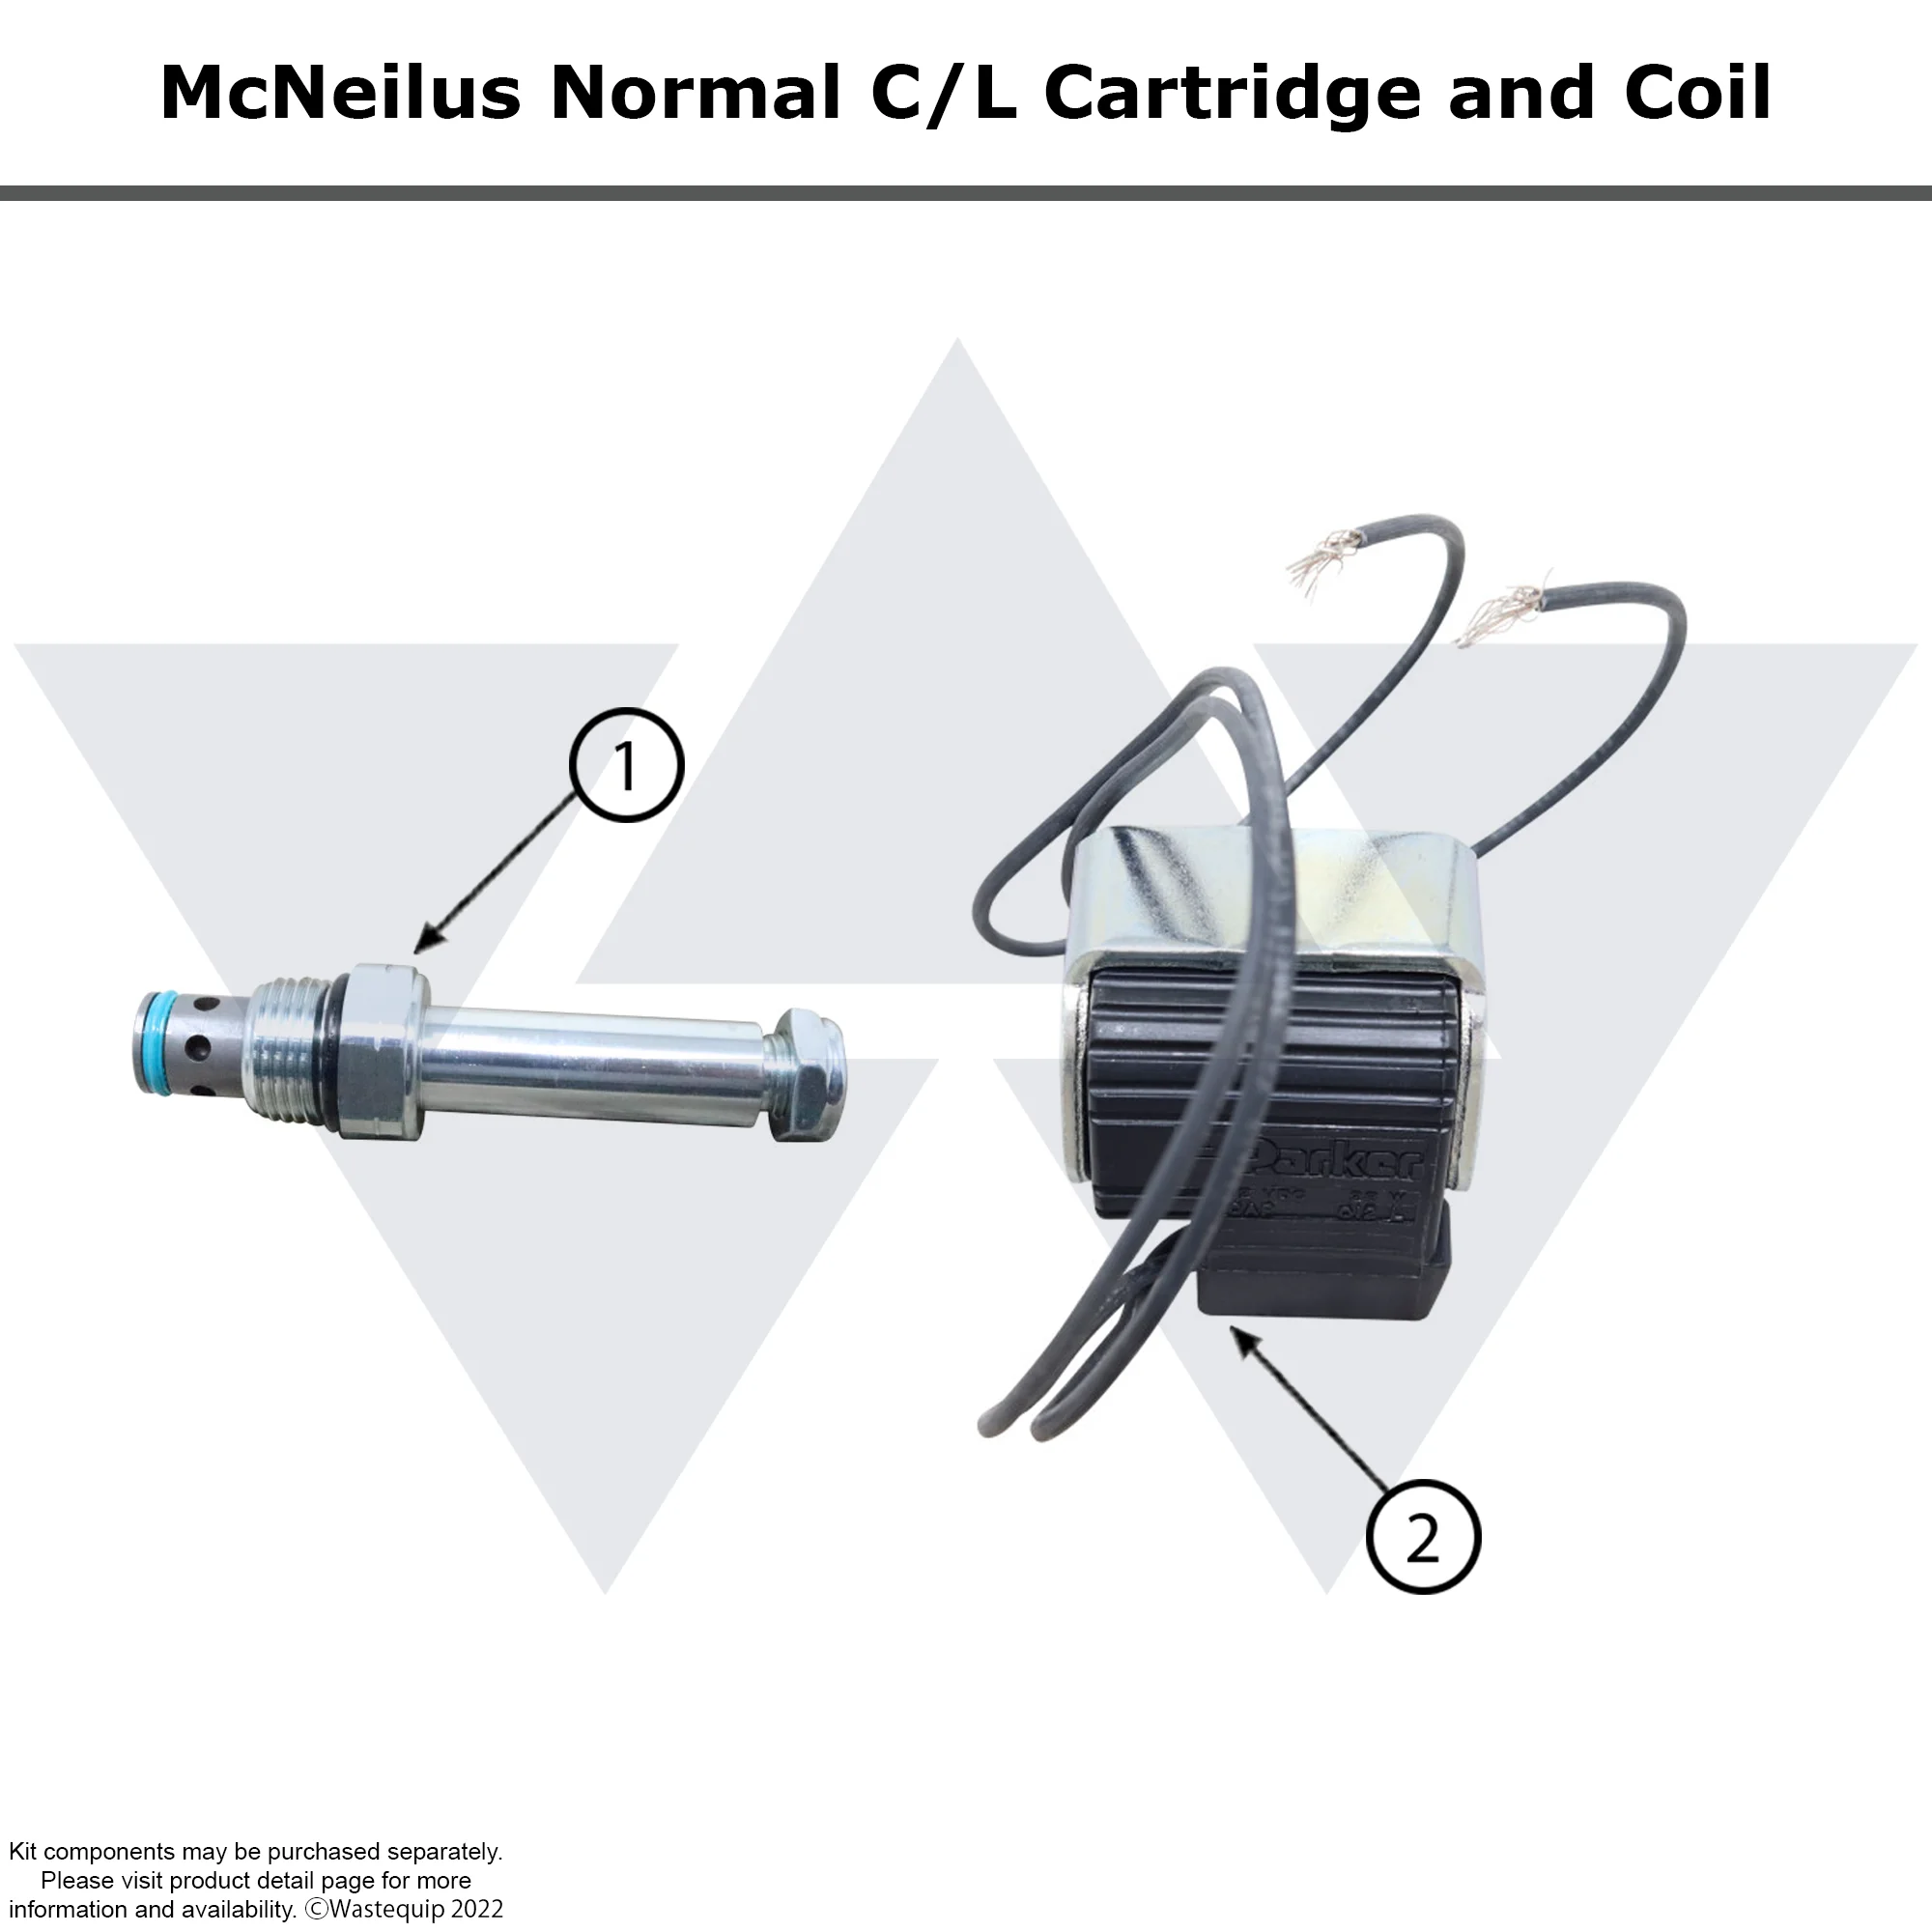 Wastebuilt® Replacement for McNeilus Normally Open C/L Cartridge Without Coil - CEC